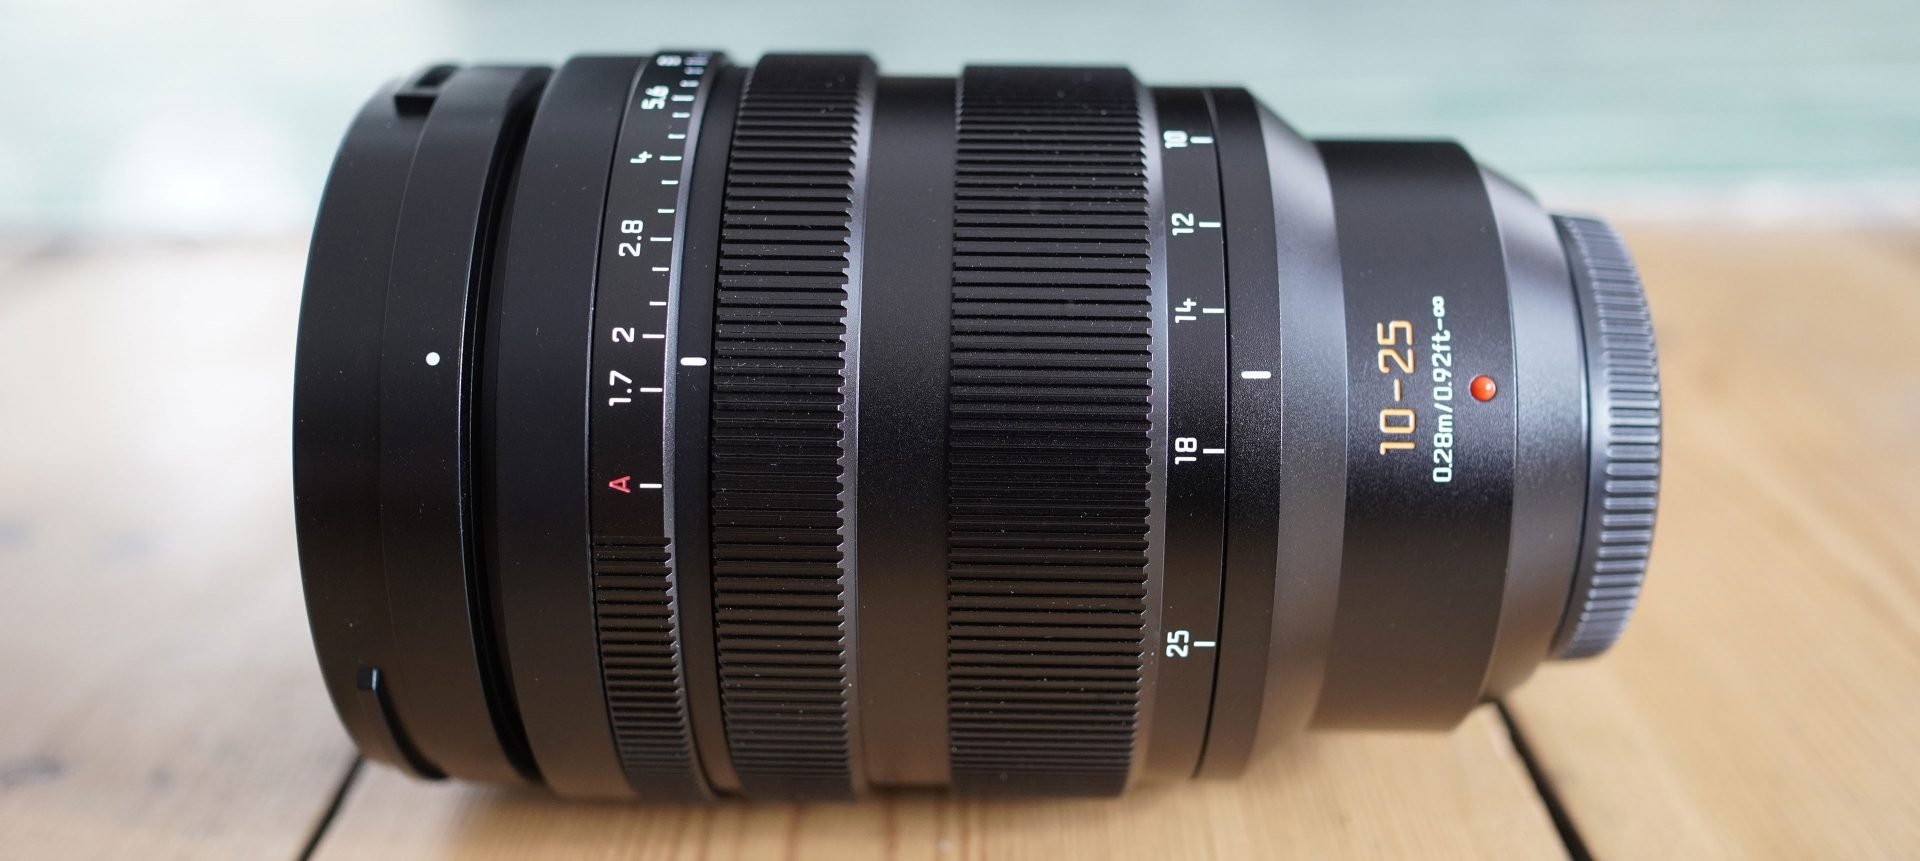 Leica DG 10-25mm f1.7 review | Cameralabs